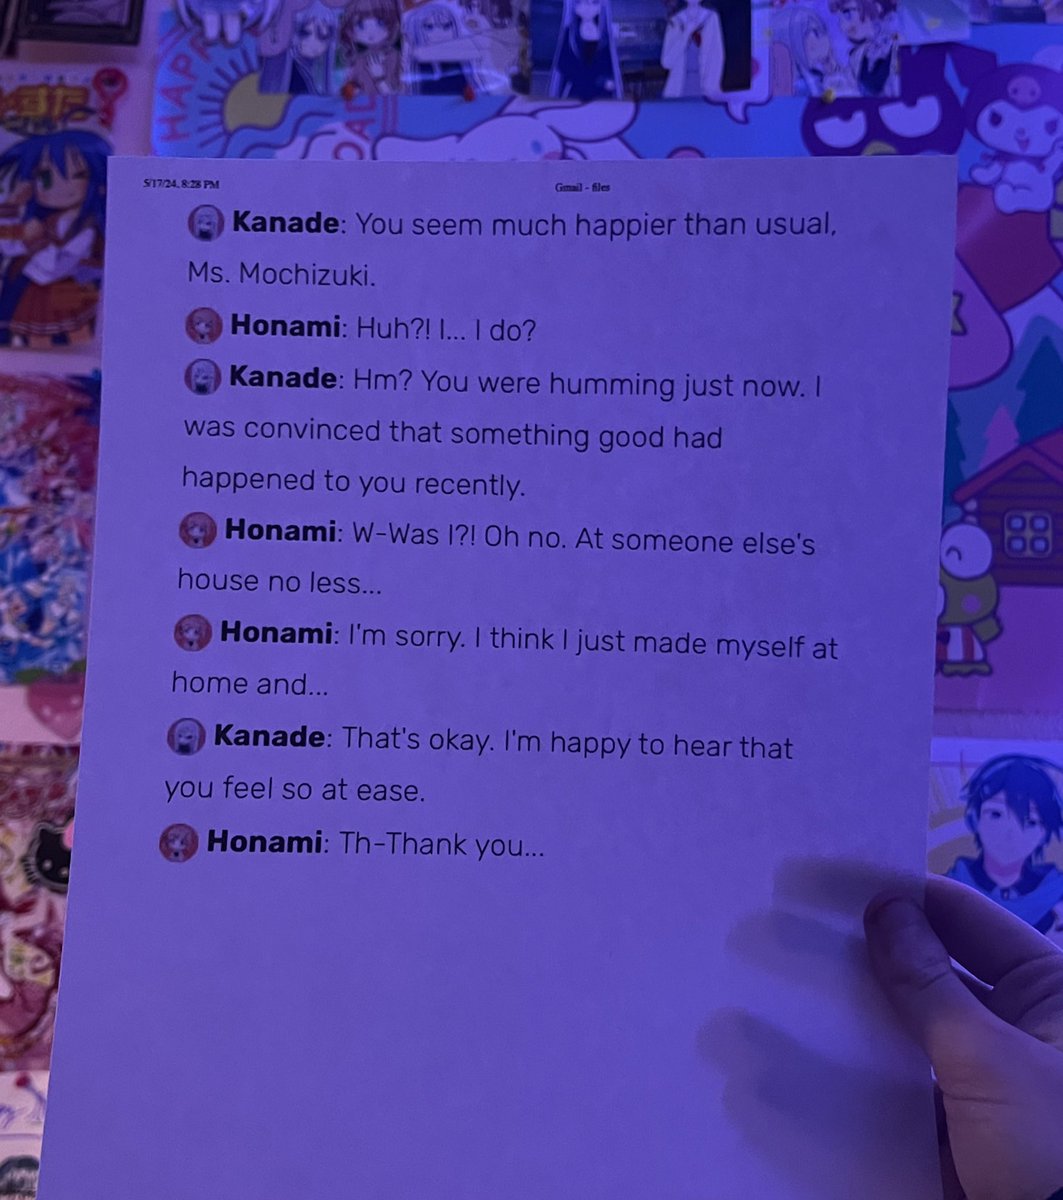 this interaction sickens me so i printed it out so i can burn it